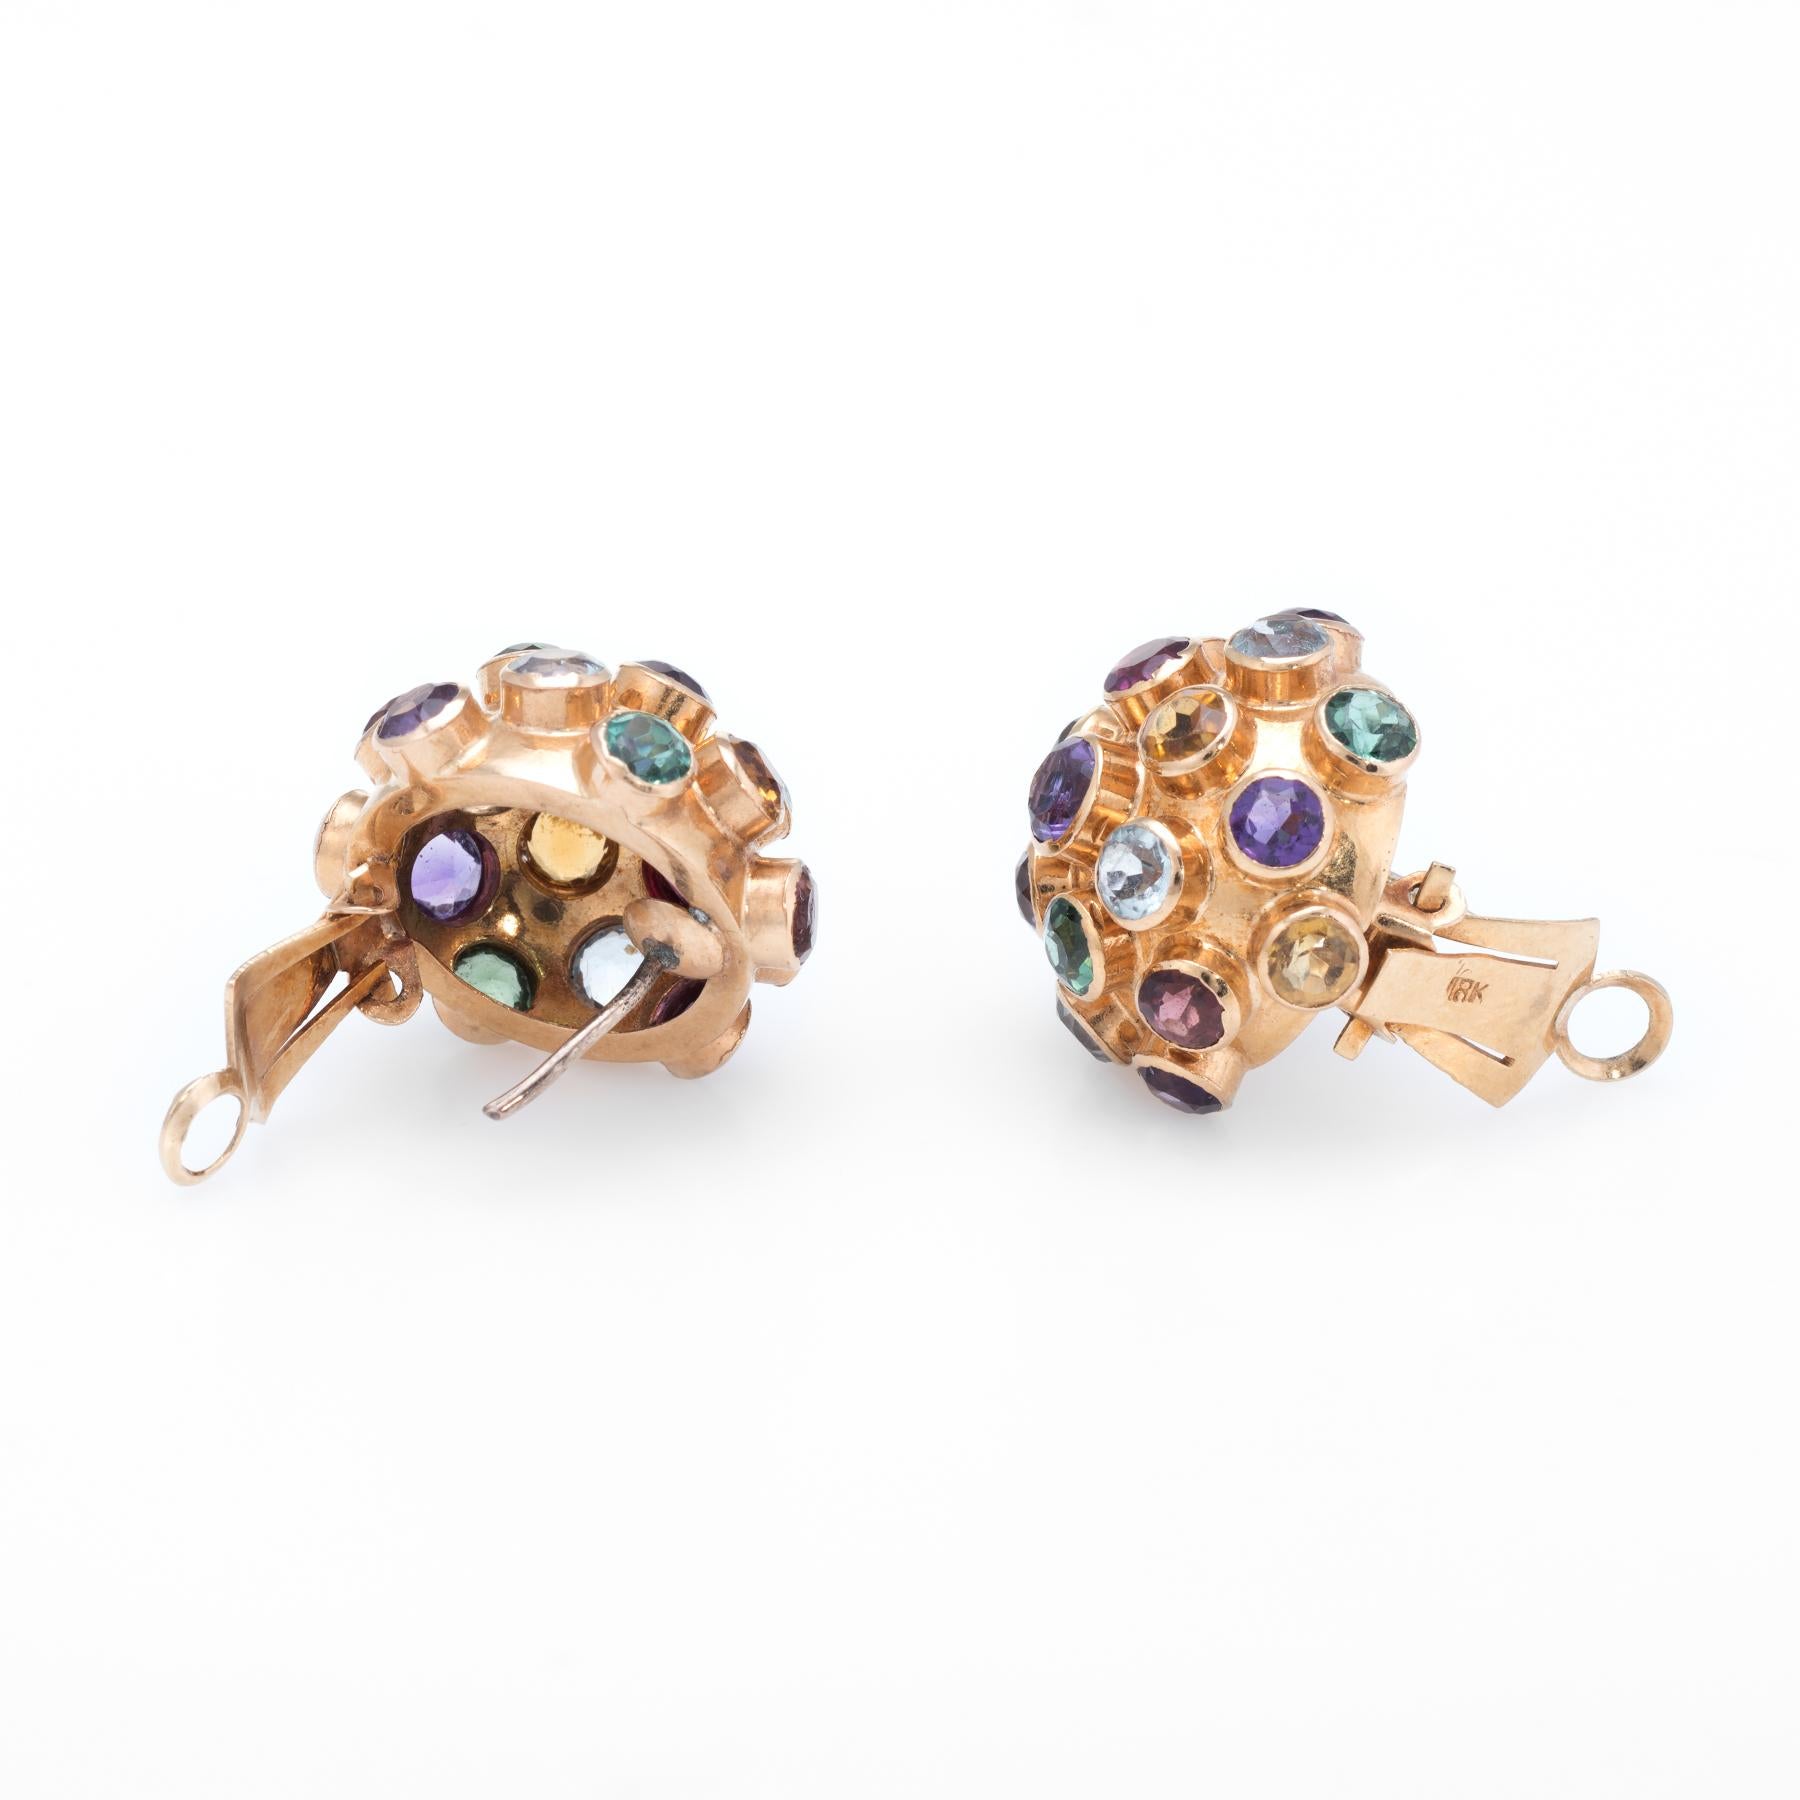 Ornate dome sputnik gemstone earrings (circa 1950s to 1960s), crafted in 18 karat rose gold. 

Gemstones (blue topaz, amethyst, aquamarine, pink & green tourmaline, citrine and garnet) total an estimated 4.50 carats. The gemstones are in excellent